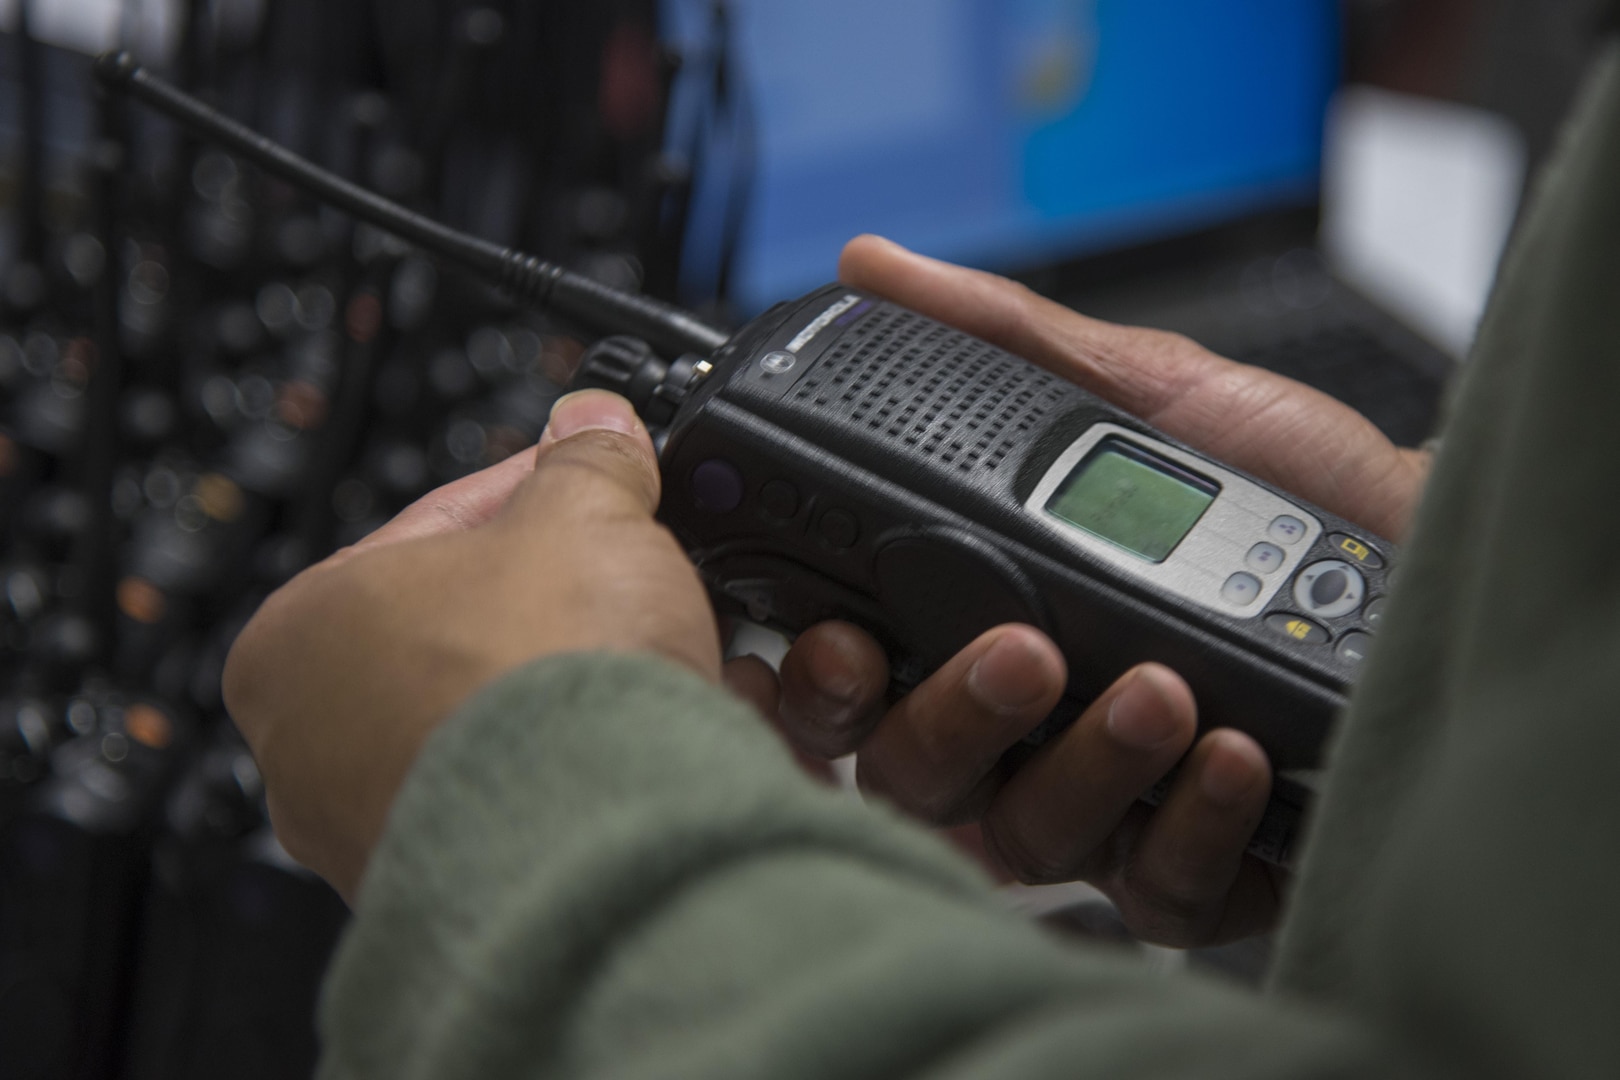 A 744th Communications Squadron radio frequency transmission system technician inspects a land mobile radio on Joint Base Andrews, Md., Jan. 11, 2017. Approximately 200 LMRs were given out to Airmen participating in the 58th Presidential Inauguration. The 744th CS’s mission is to keep the Airmen informed and able to communicate during the inauguration. (U.S. Air Force photo by Airman 1st Class Valentina Lopez)